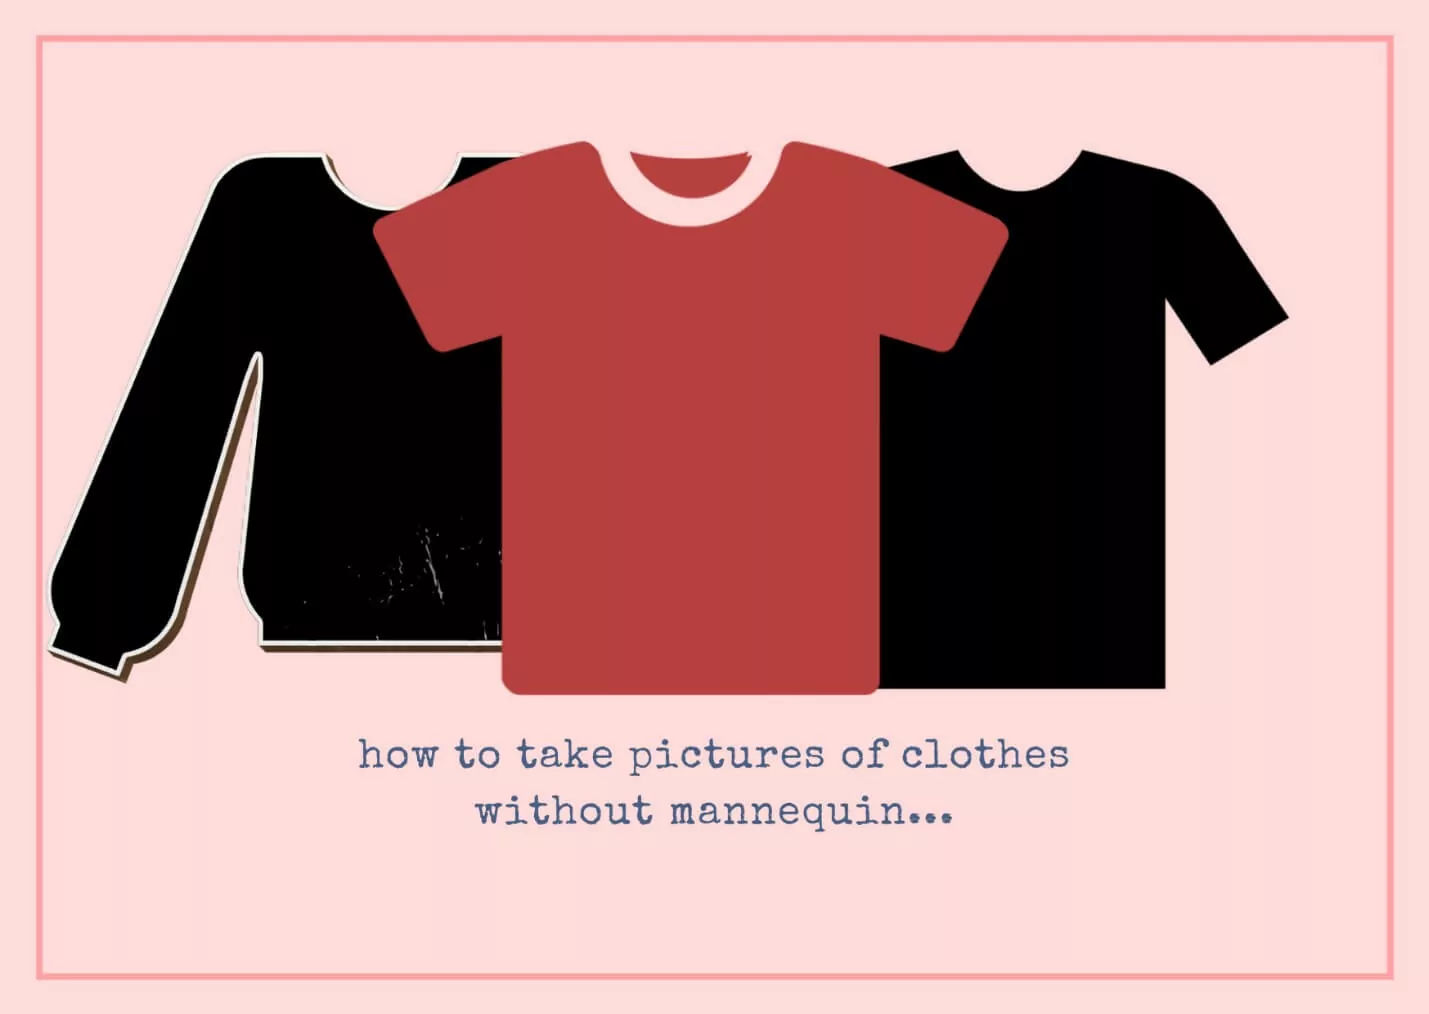  How to take pictures of clothes without mannequin?